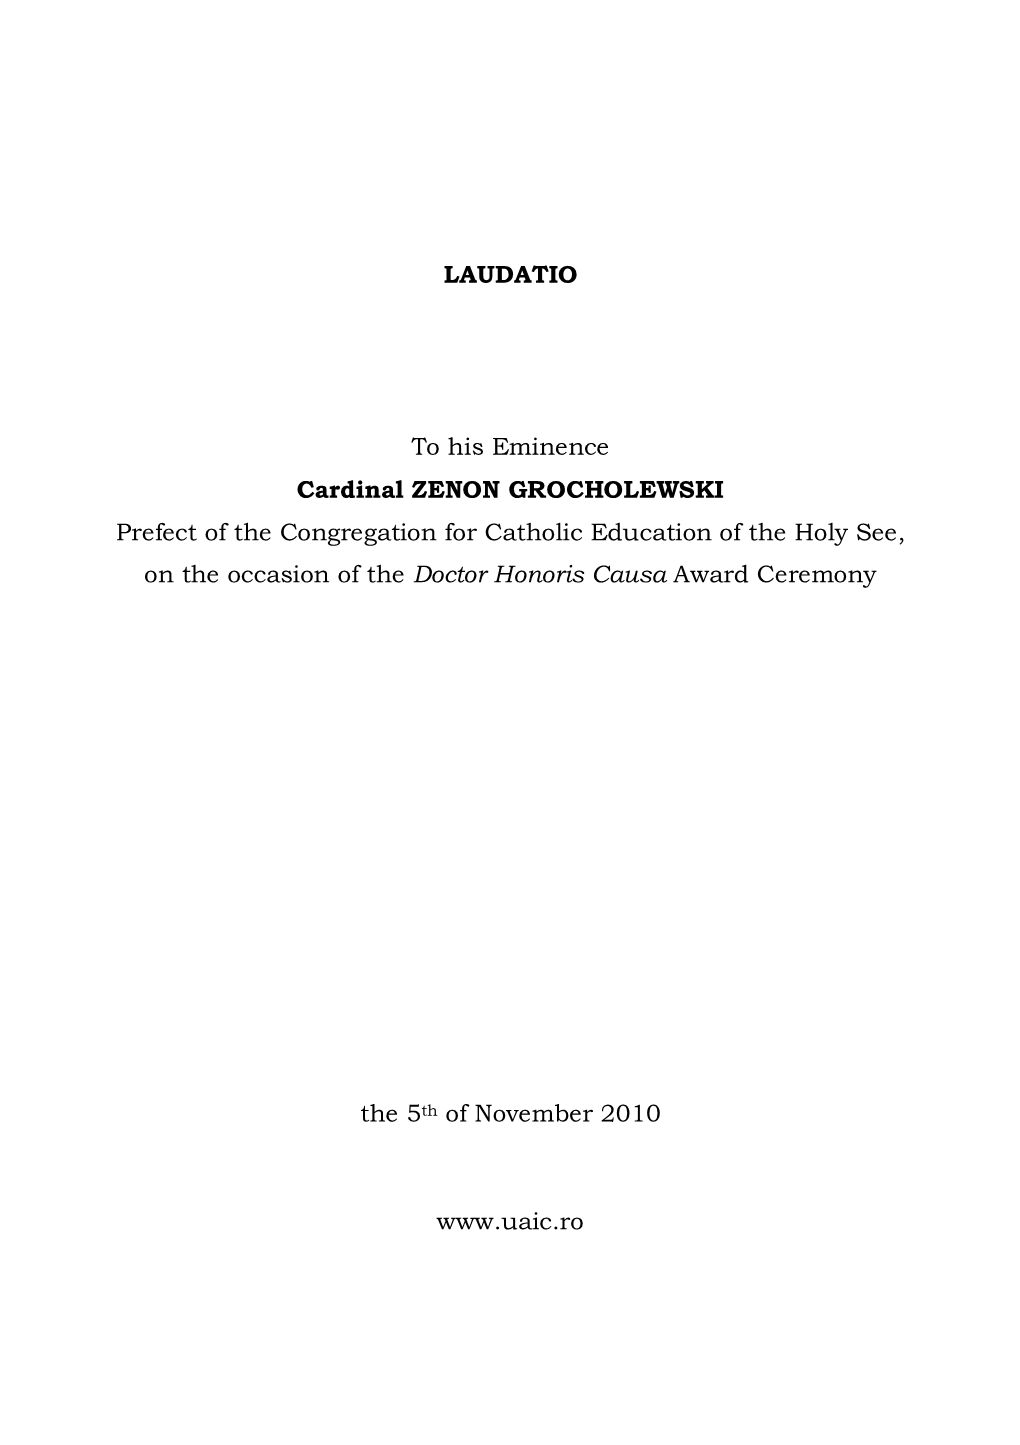 LAUDATIO to His Eminence Cardinal ZENON GROCHOLEWSKI Prefect of the Congregation for Catholic Education of the Holy See, On